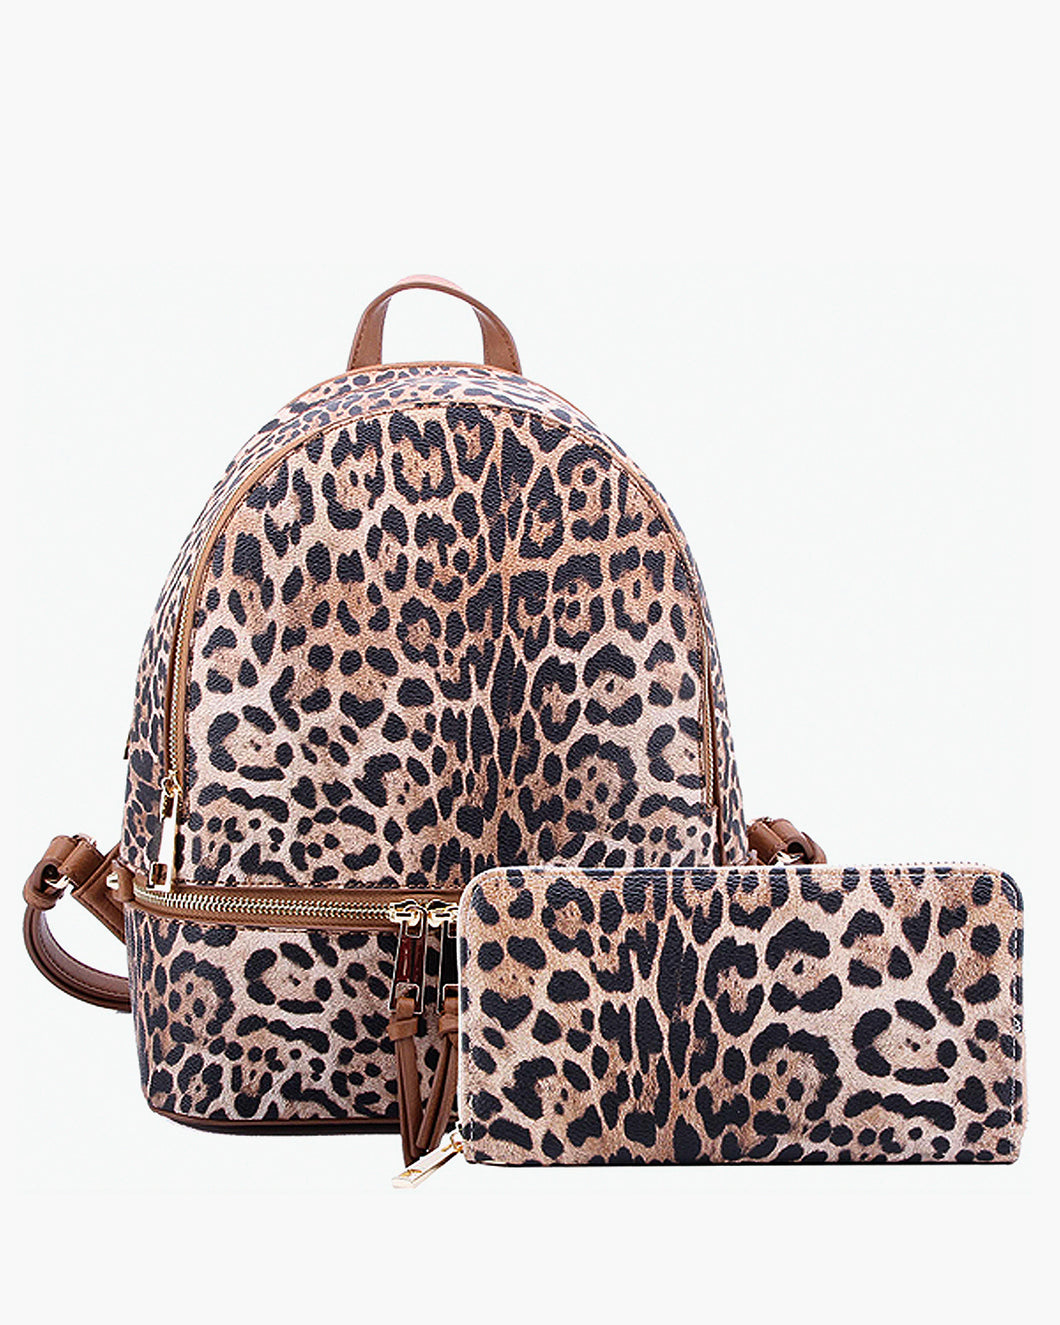 Leopard Print Backpack with Matching Wallet